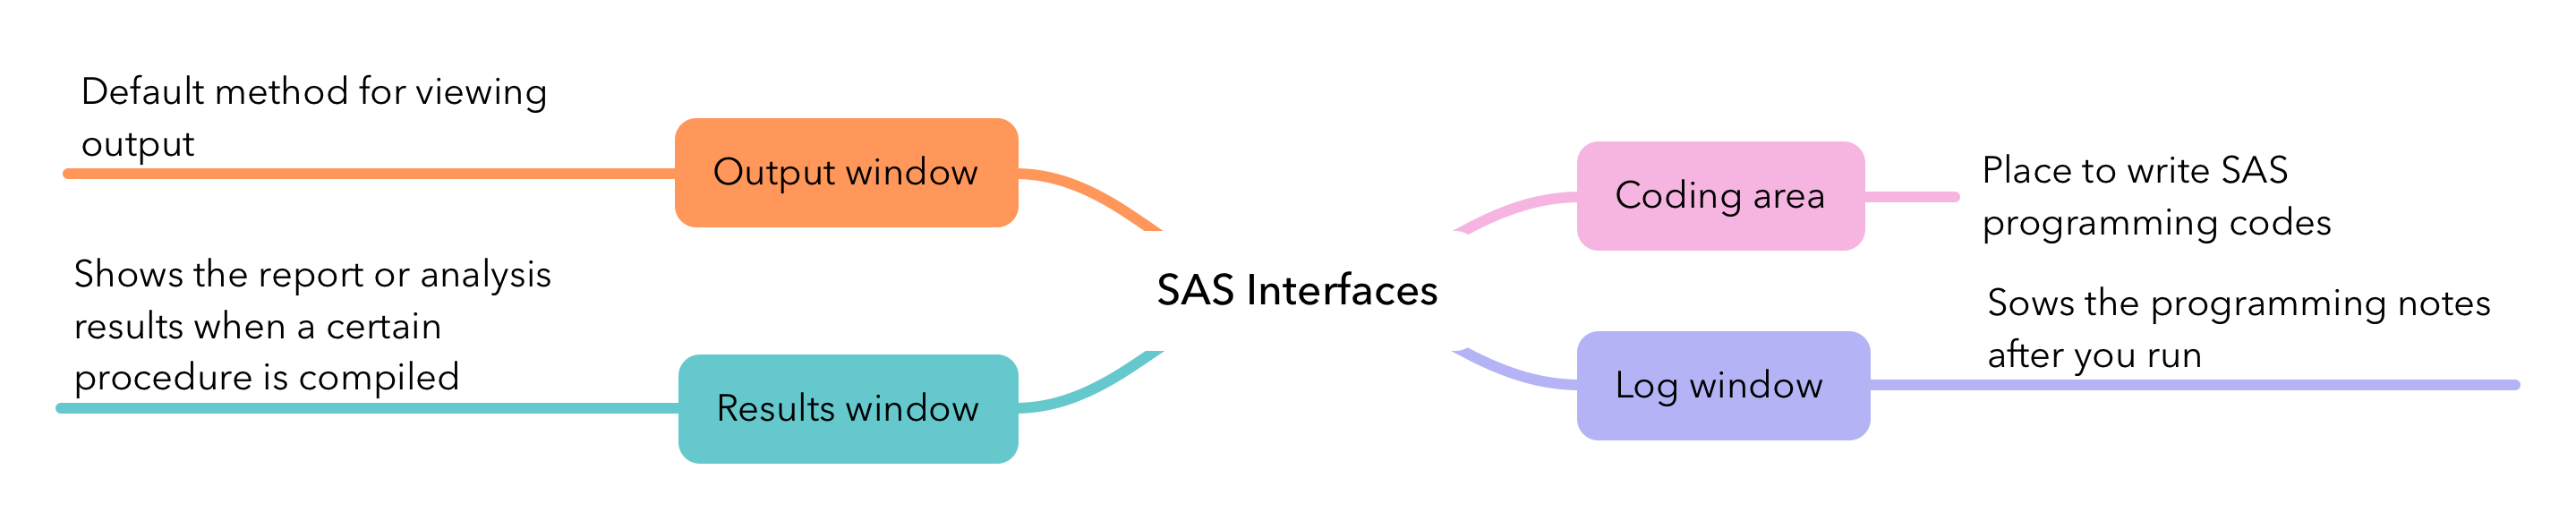 How to learn SAS Programming online for free?